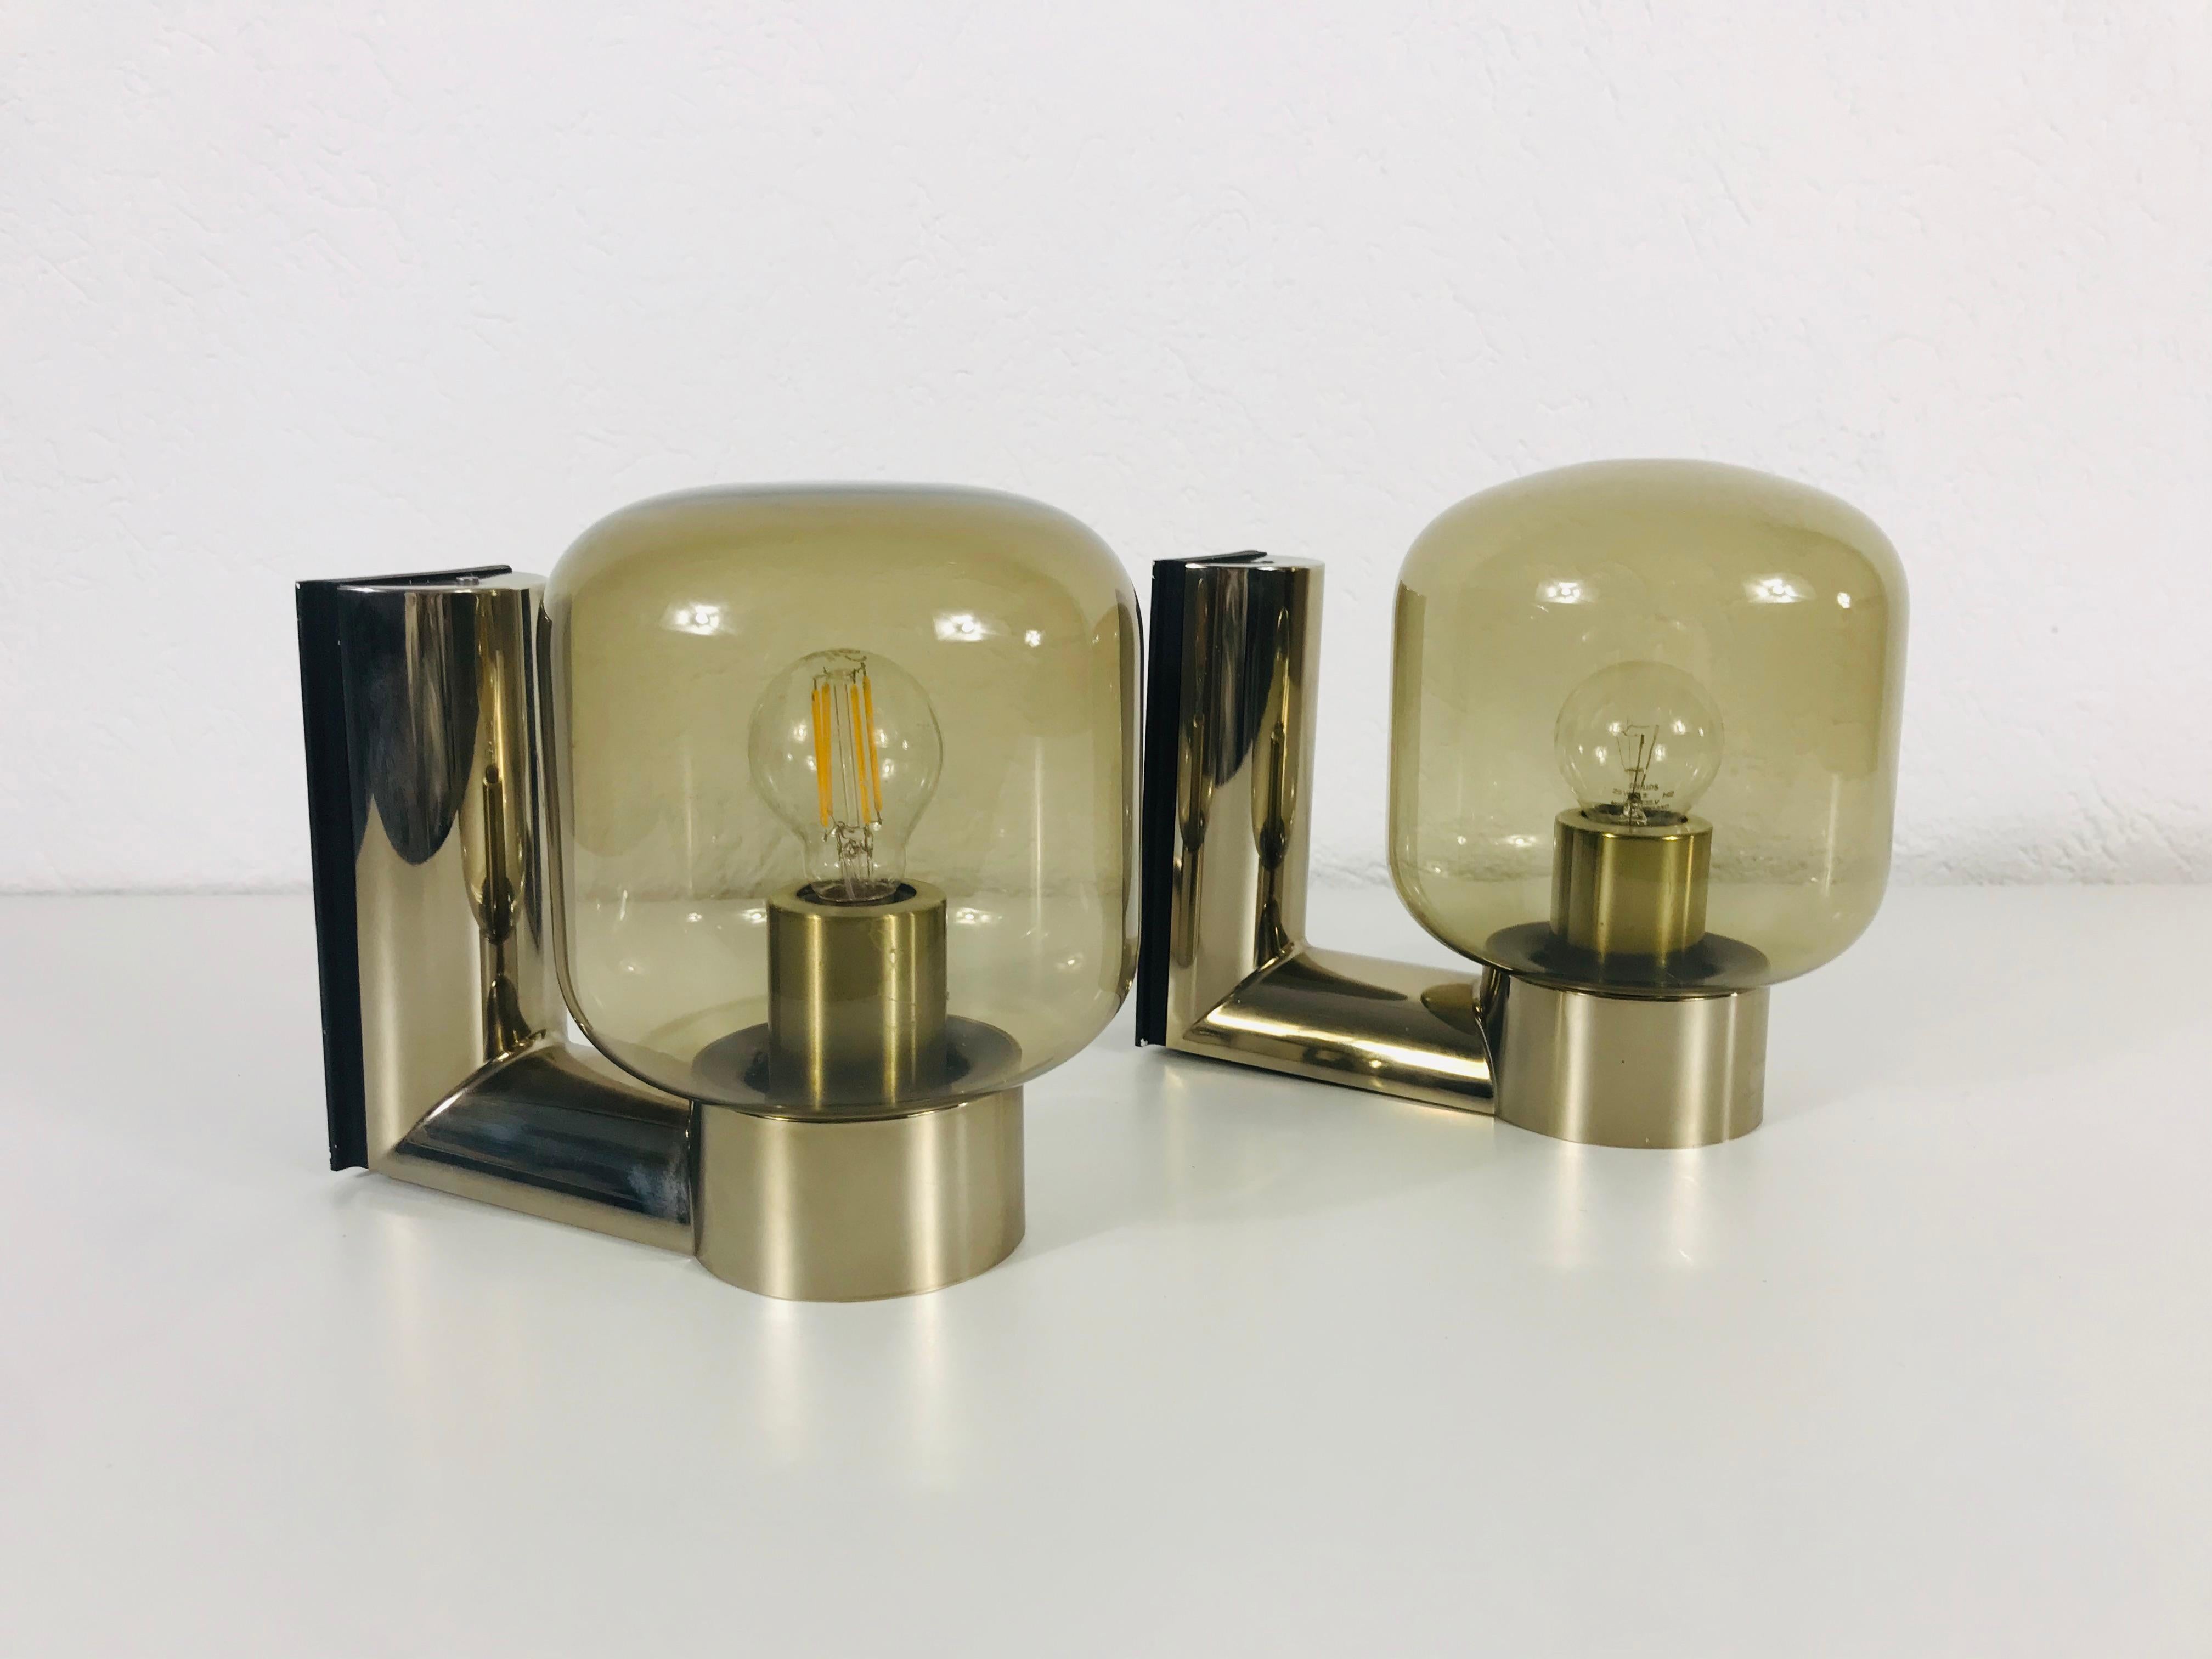 A wonderful set of 2 wall lights by the Japanese designer Motoko Ishii for the German brand Staff Leuchten. They have a very thin amber glass shade and a brass base.

The lights require E14 light bulbs. Works with 120/220 V. Very good vintage